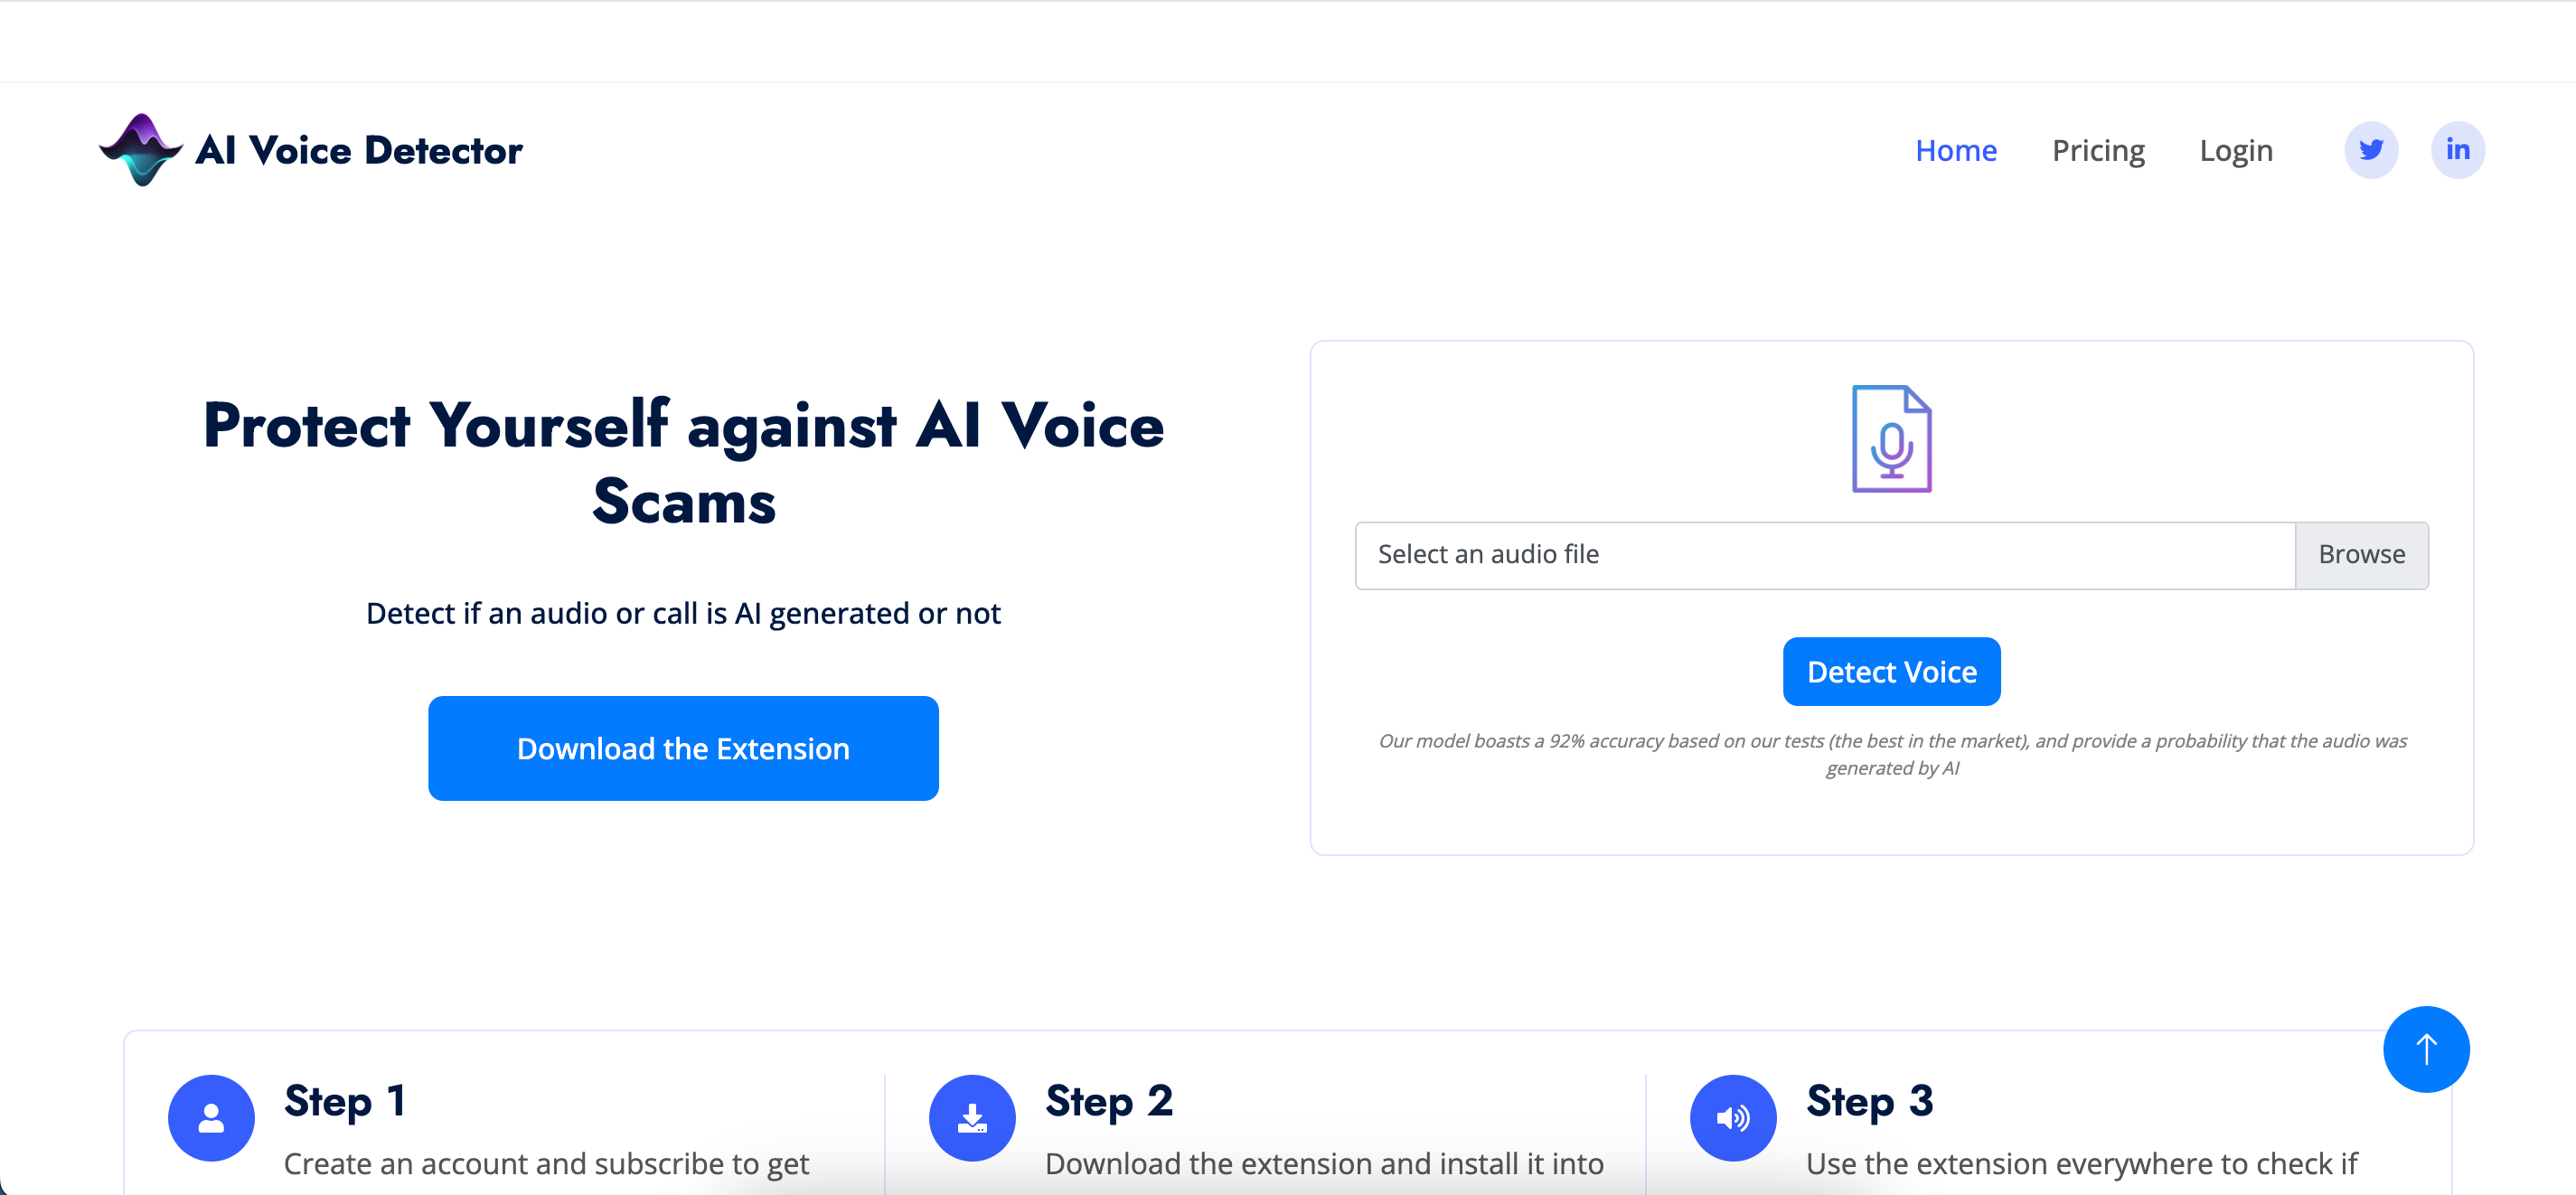 The Voice Detection Page on AI Voice Detector